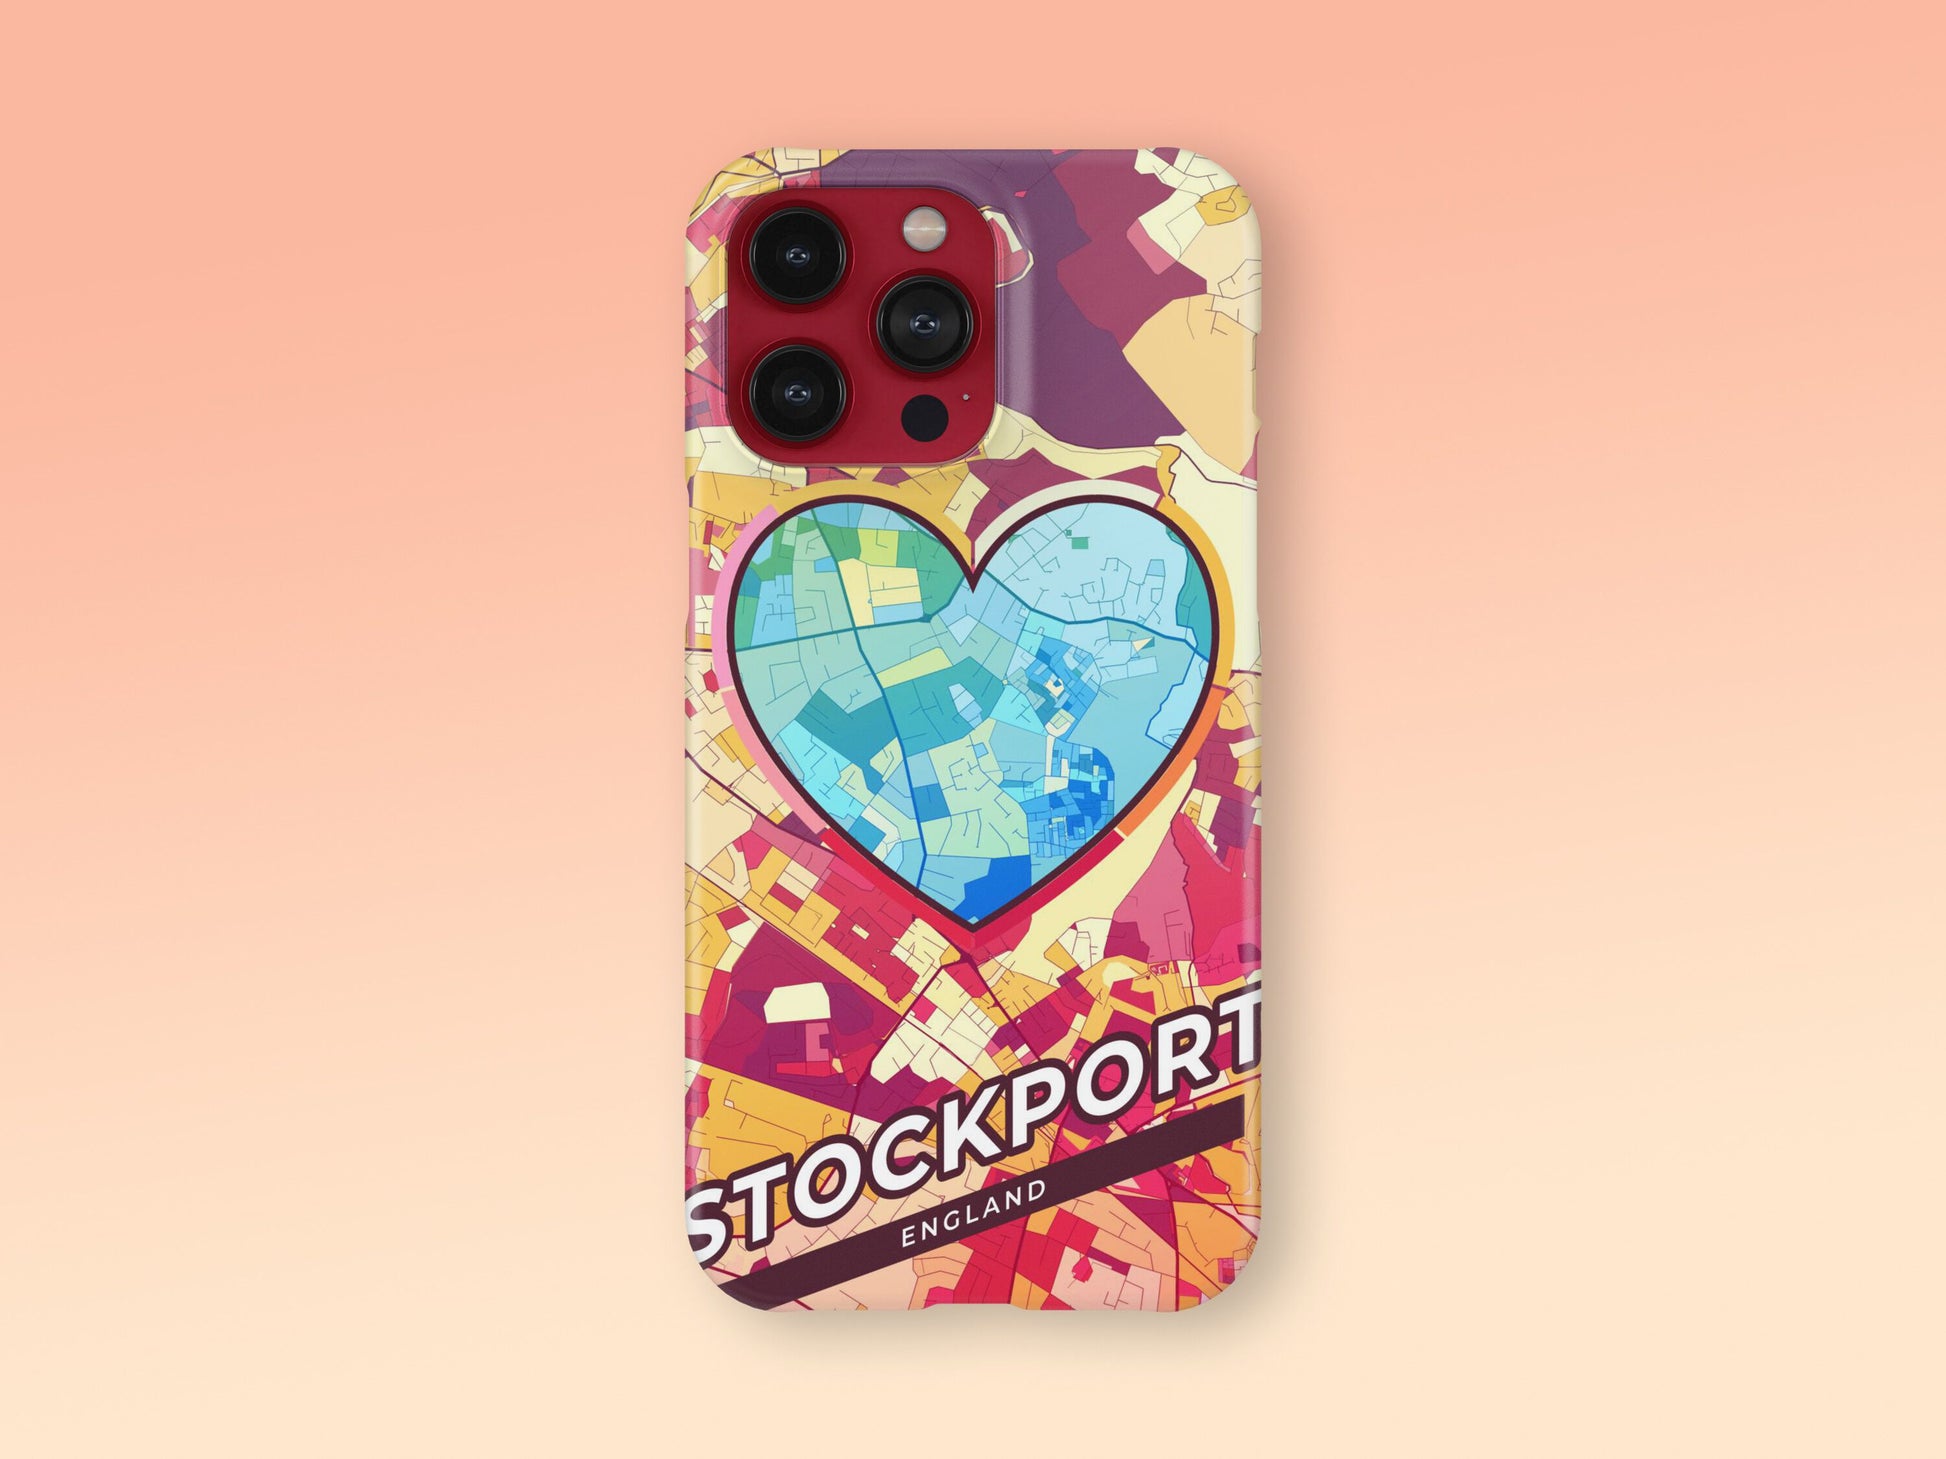 Stockport England slim phone case with colorful icon 2